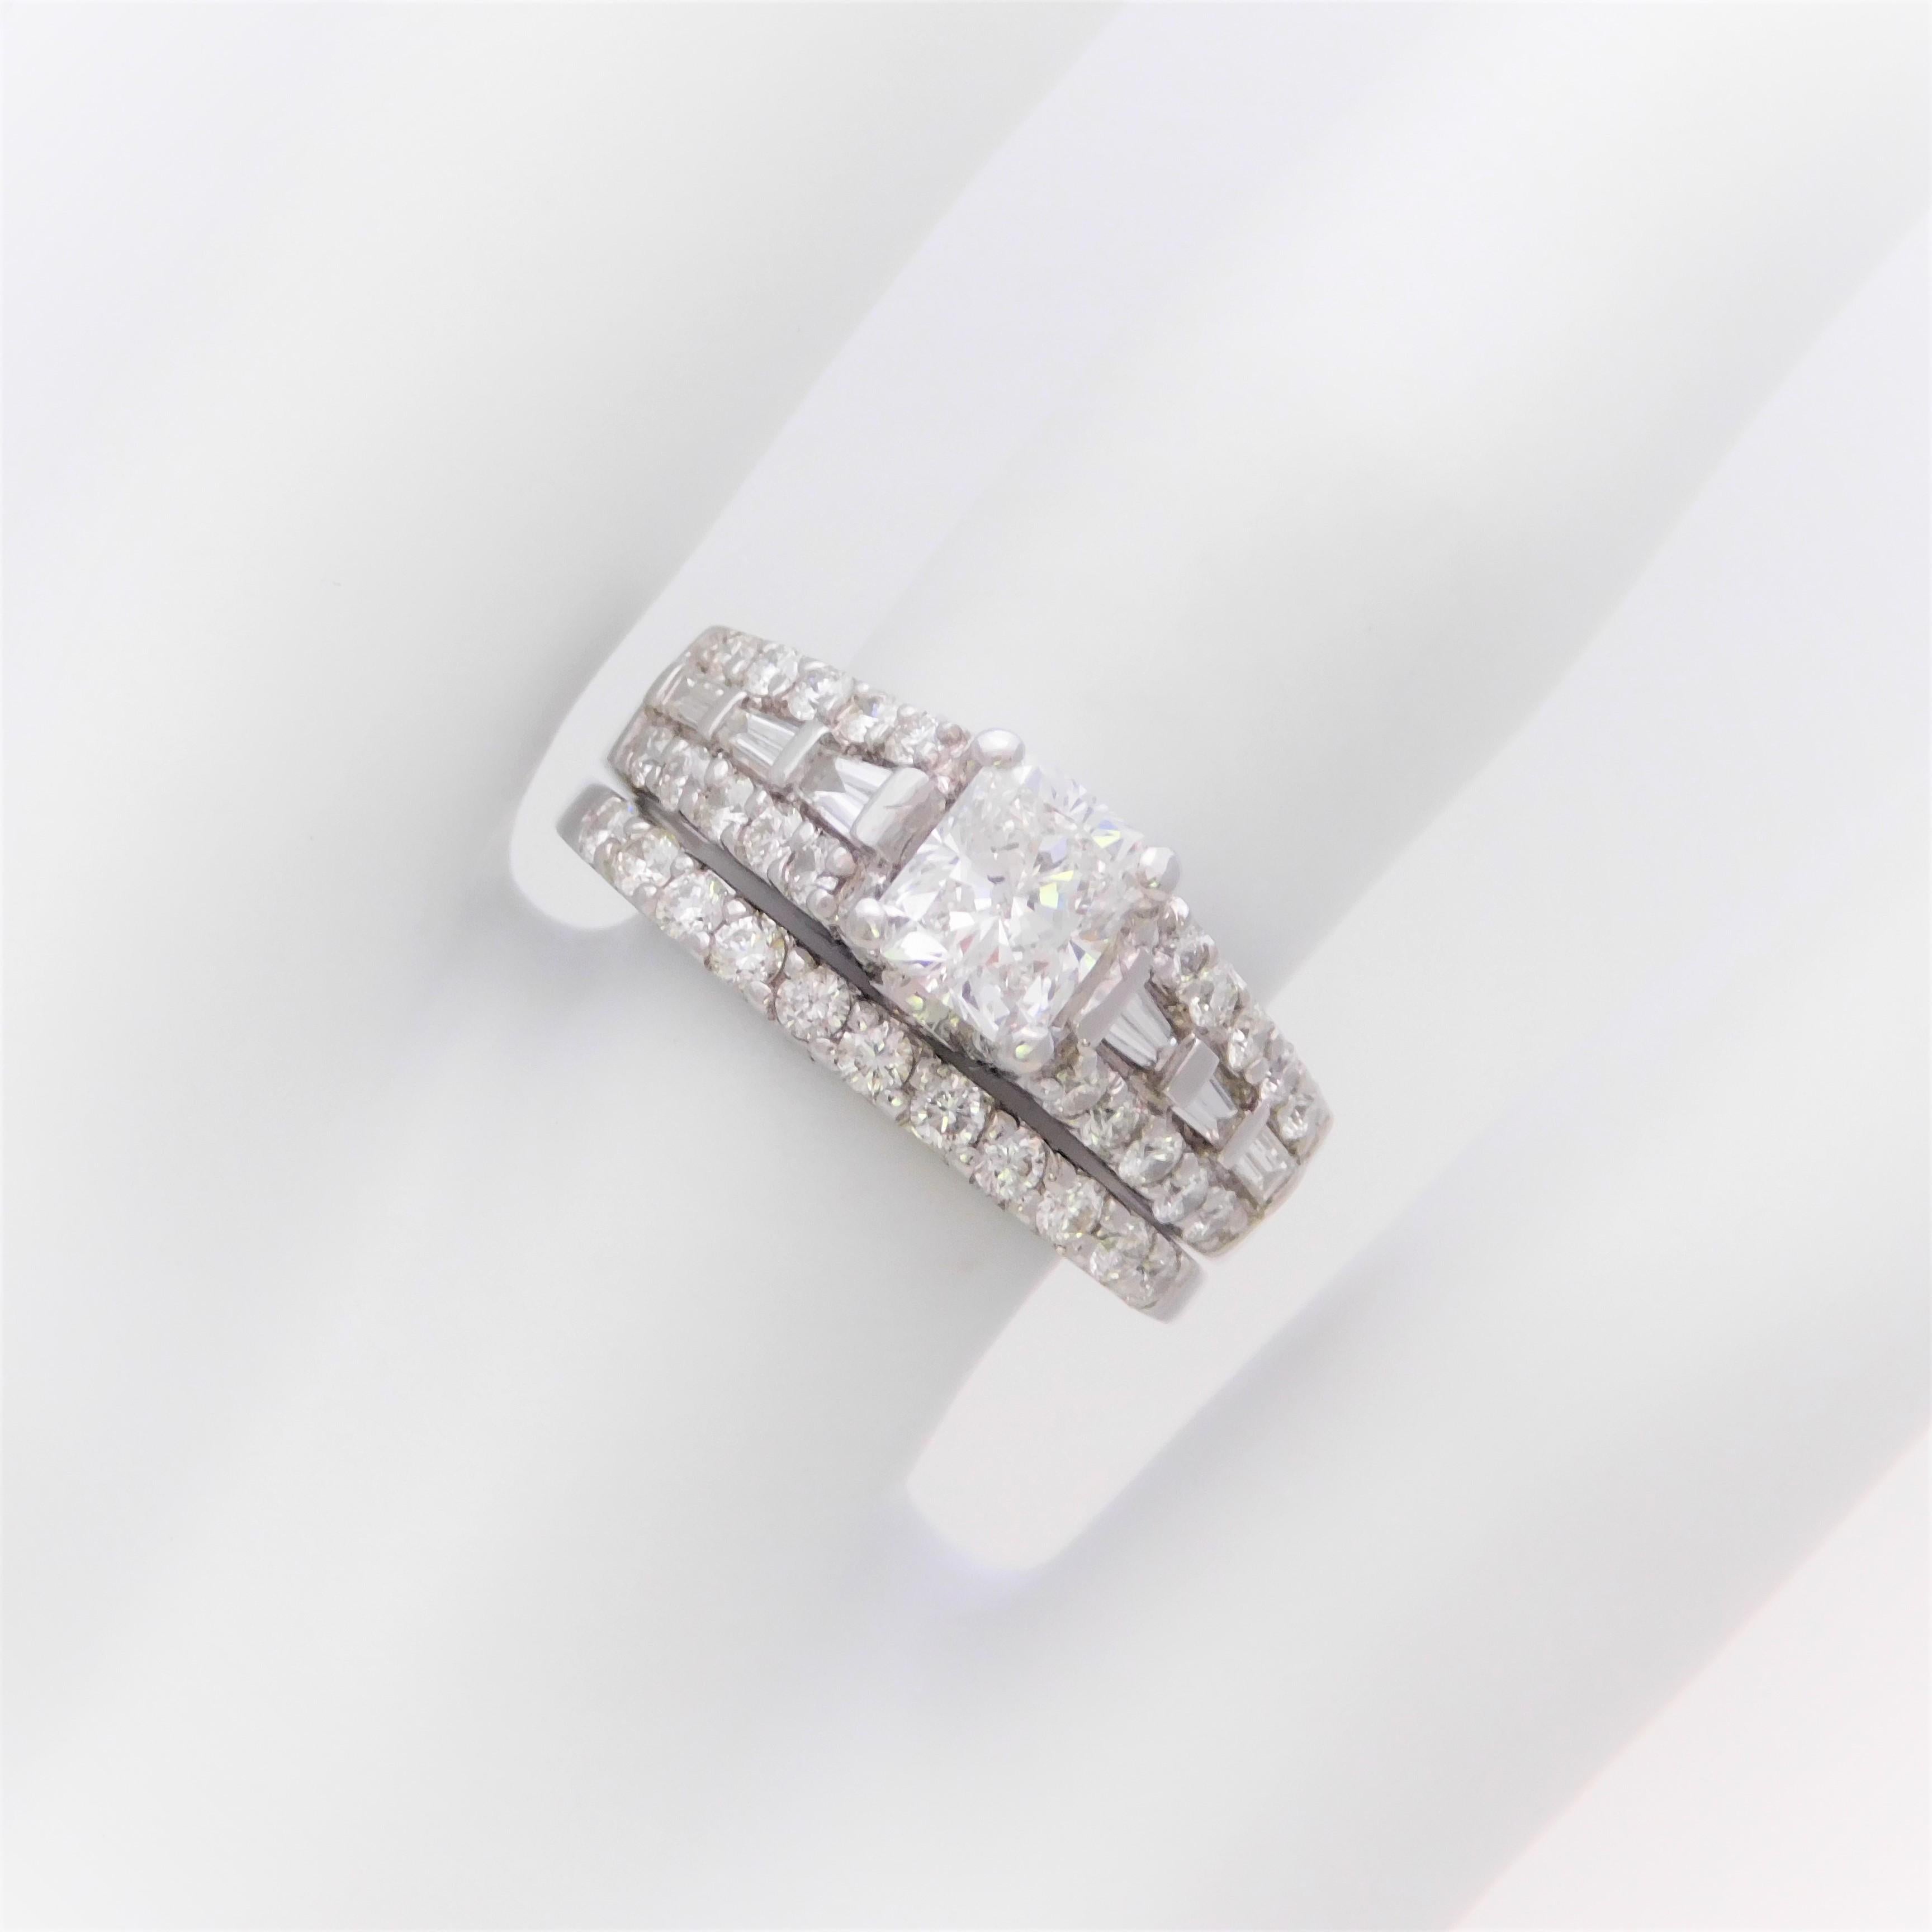 This absolutely jaw dropping bridal set has been crafted in solid 14k white gold.  The custom designed engagement ring has been masterfully jeweled, in a 4-prong setting, with an extremely high quality natural 1.01ct Radiant-cut diamond as its